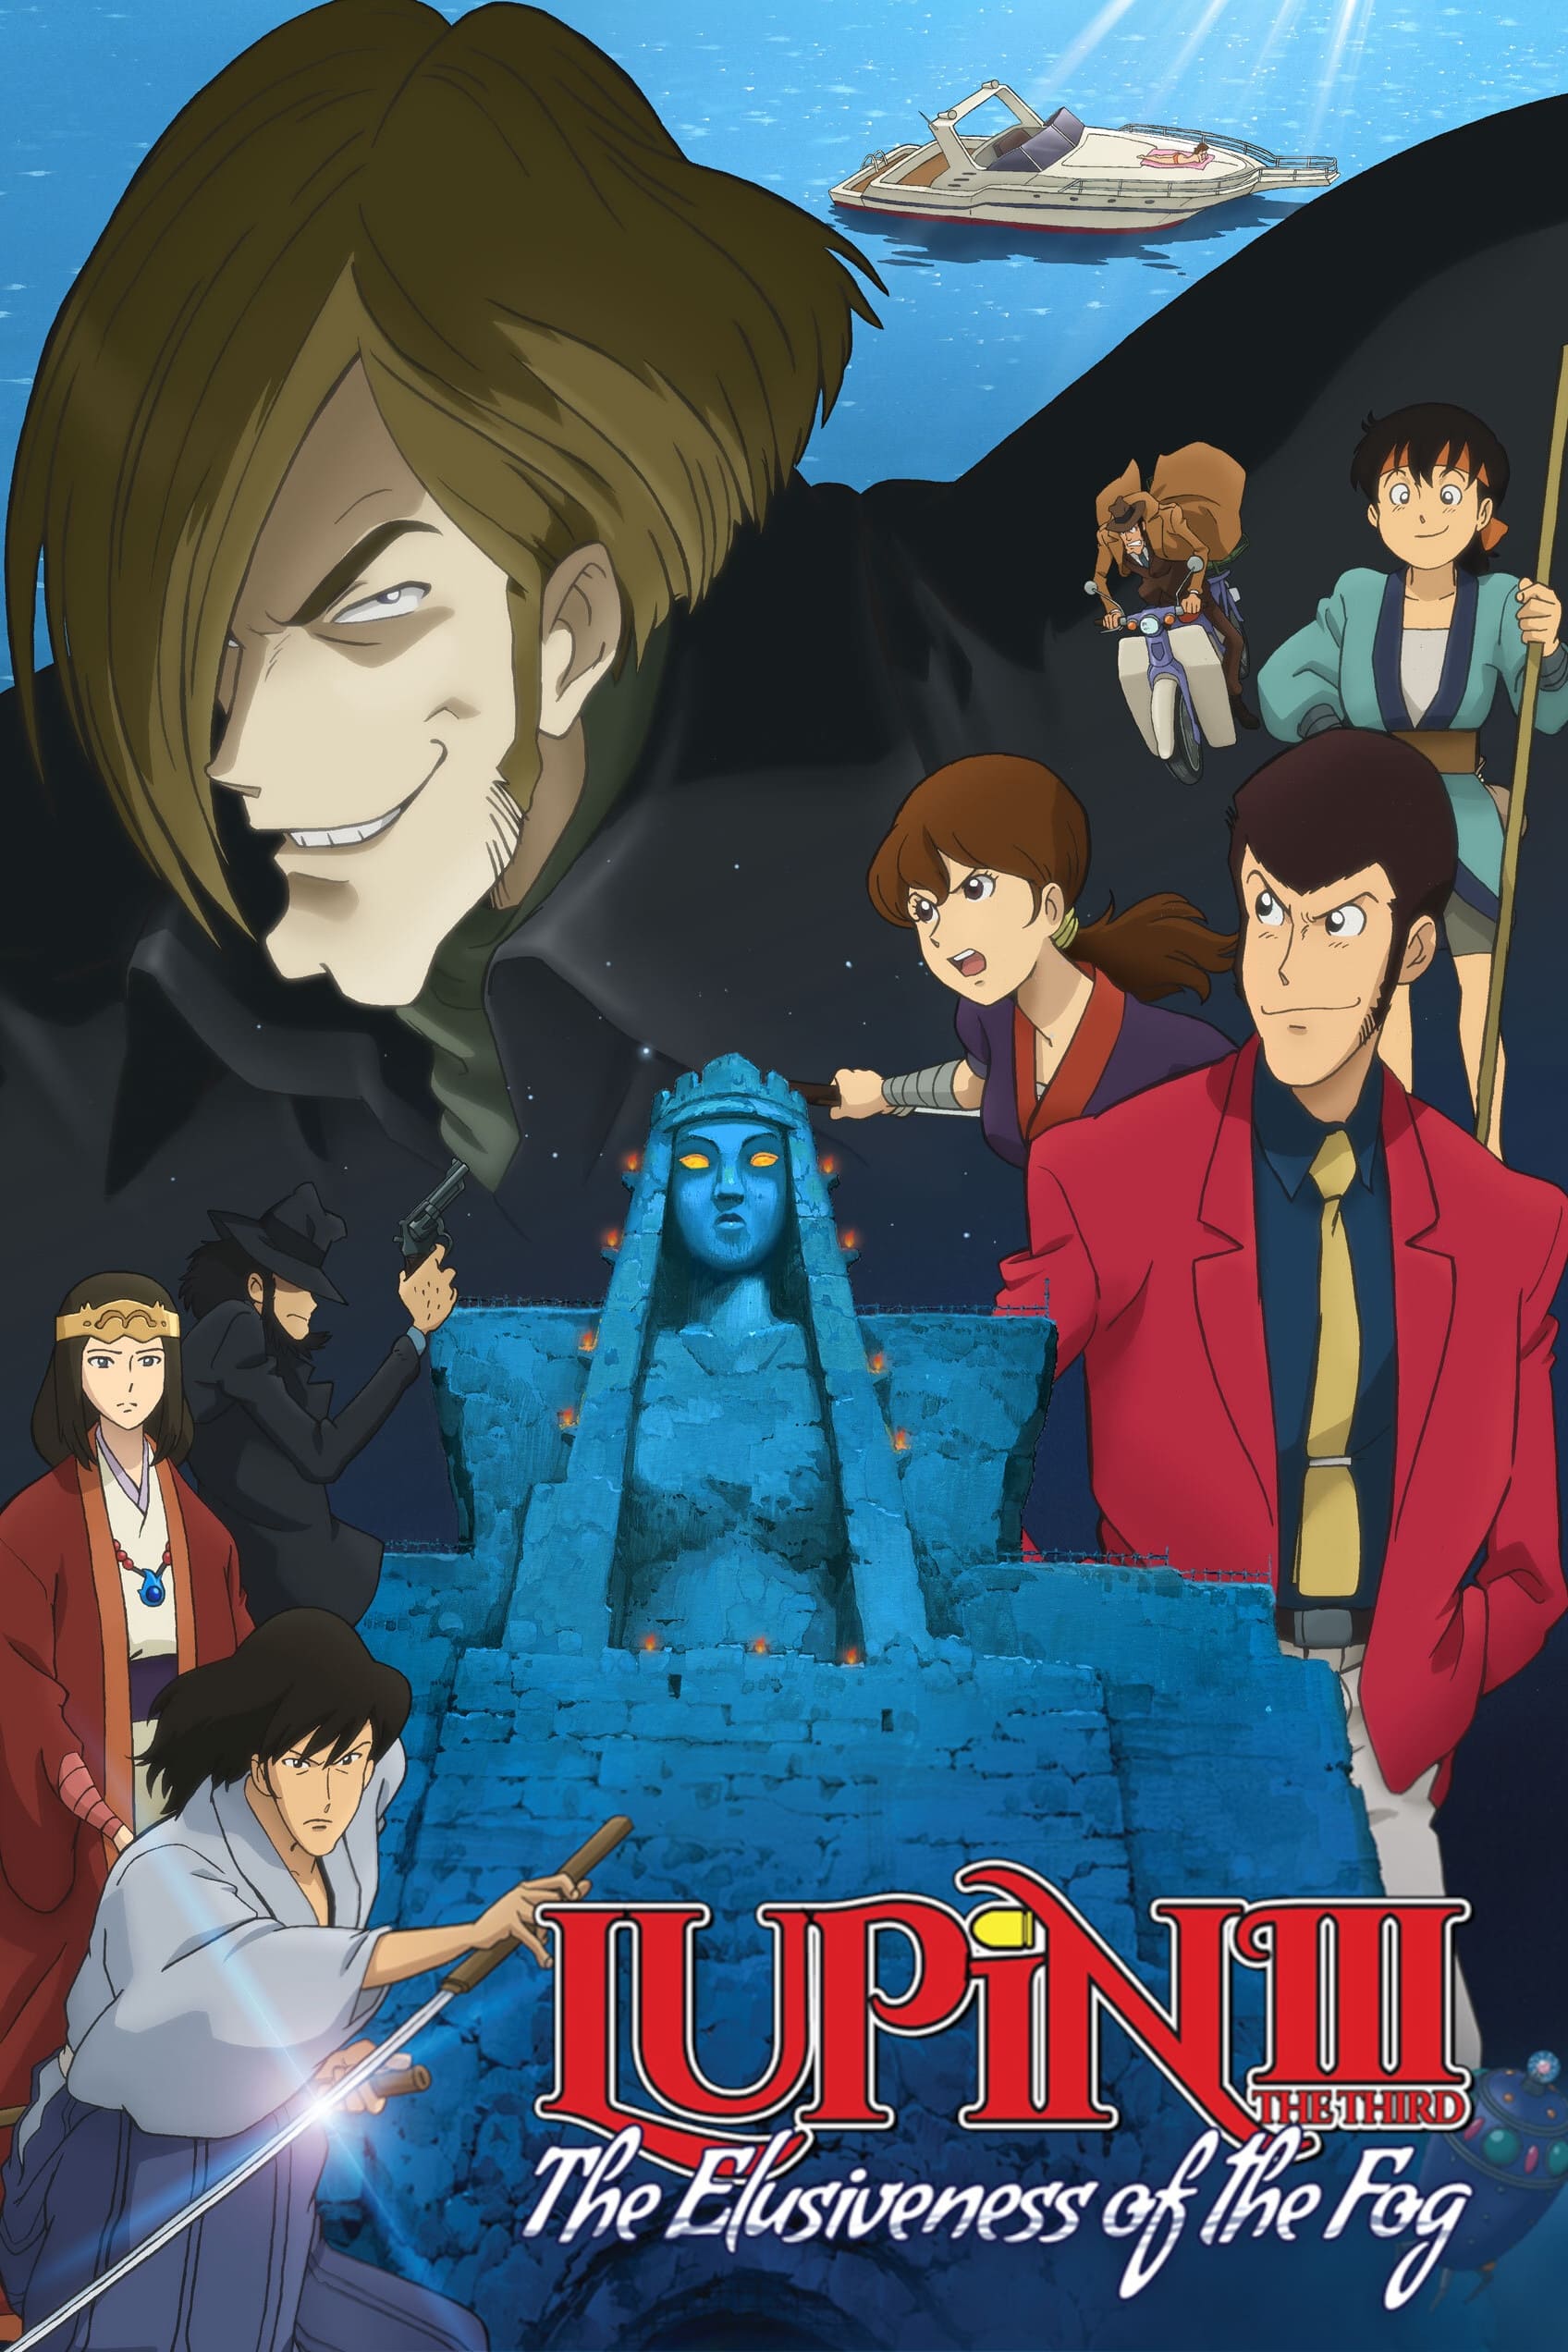 Lupin the Third: The Elusiveness of the Fog (2007)